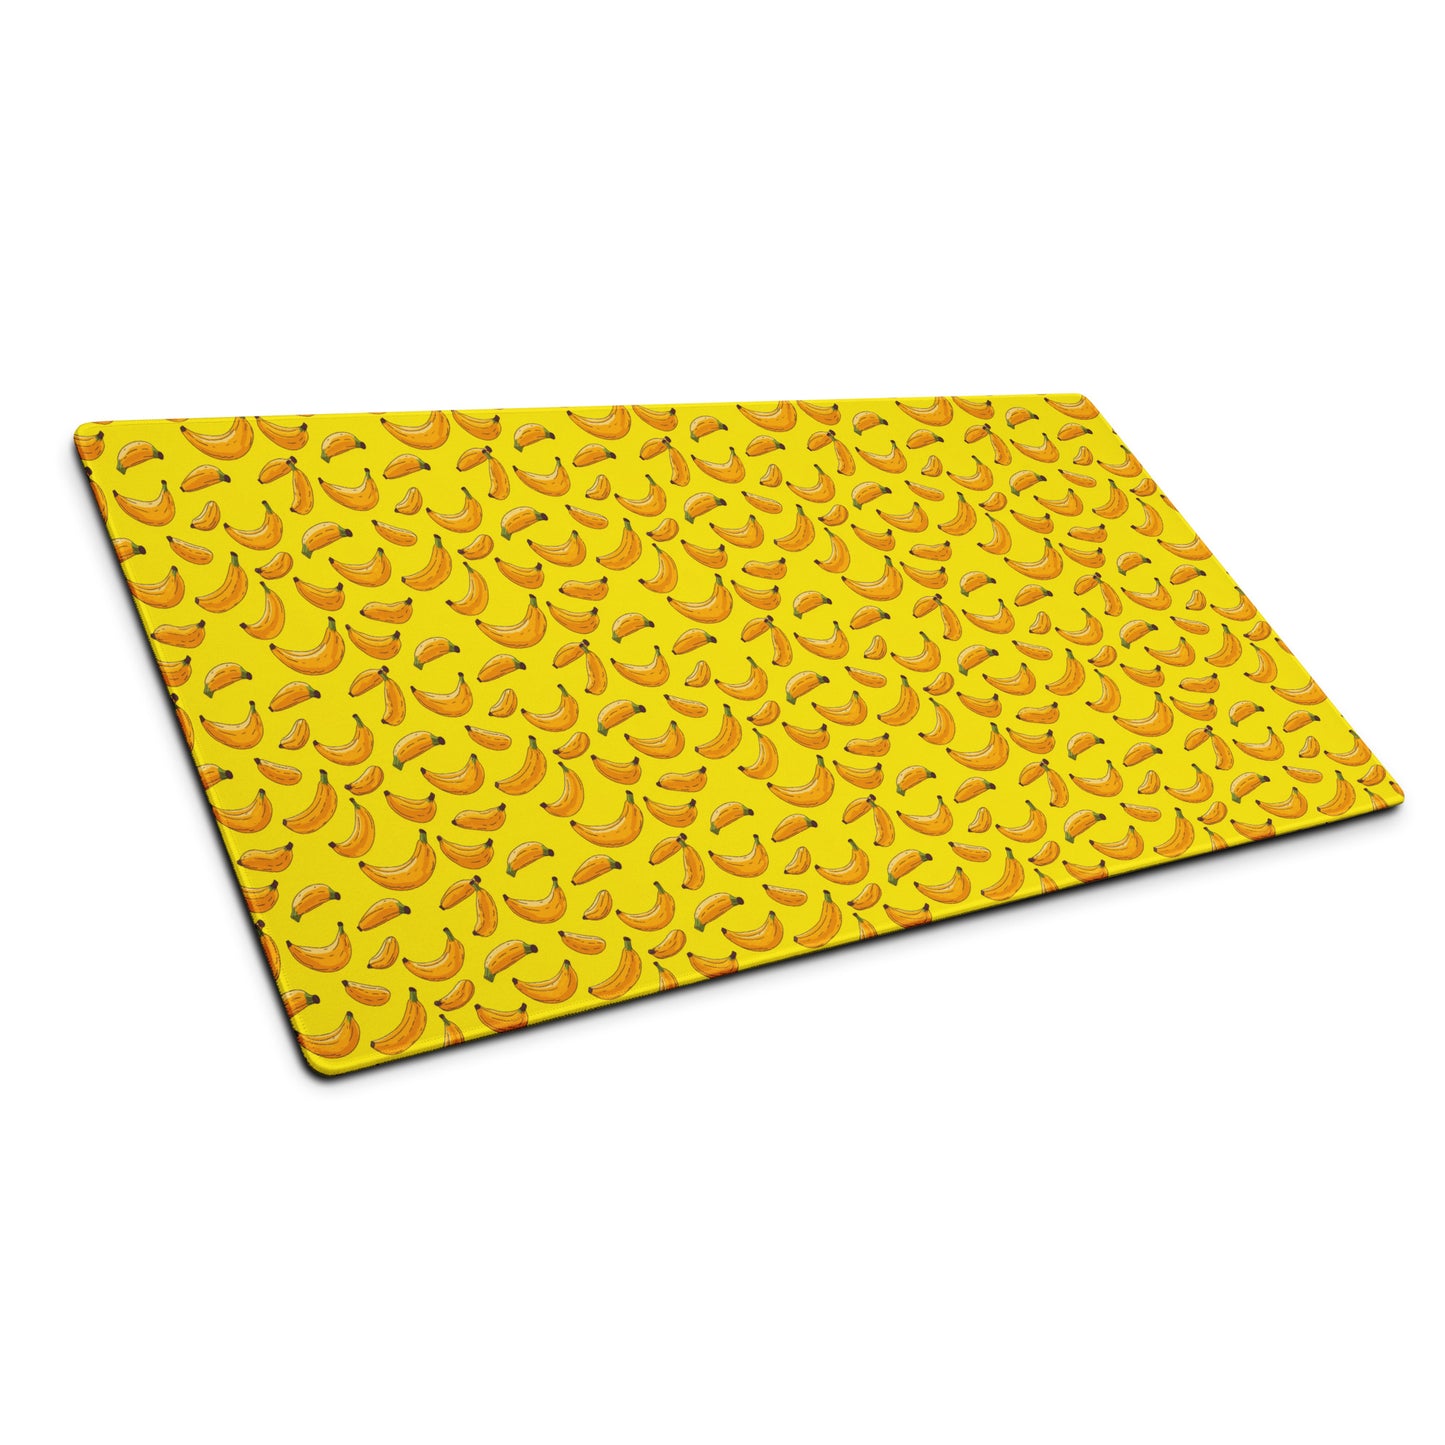 A 36" x 18" desk pad with bananas all over it shown at an angle. Yellow in color.